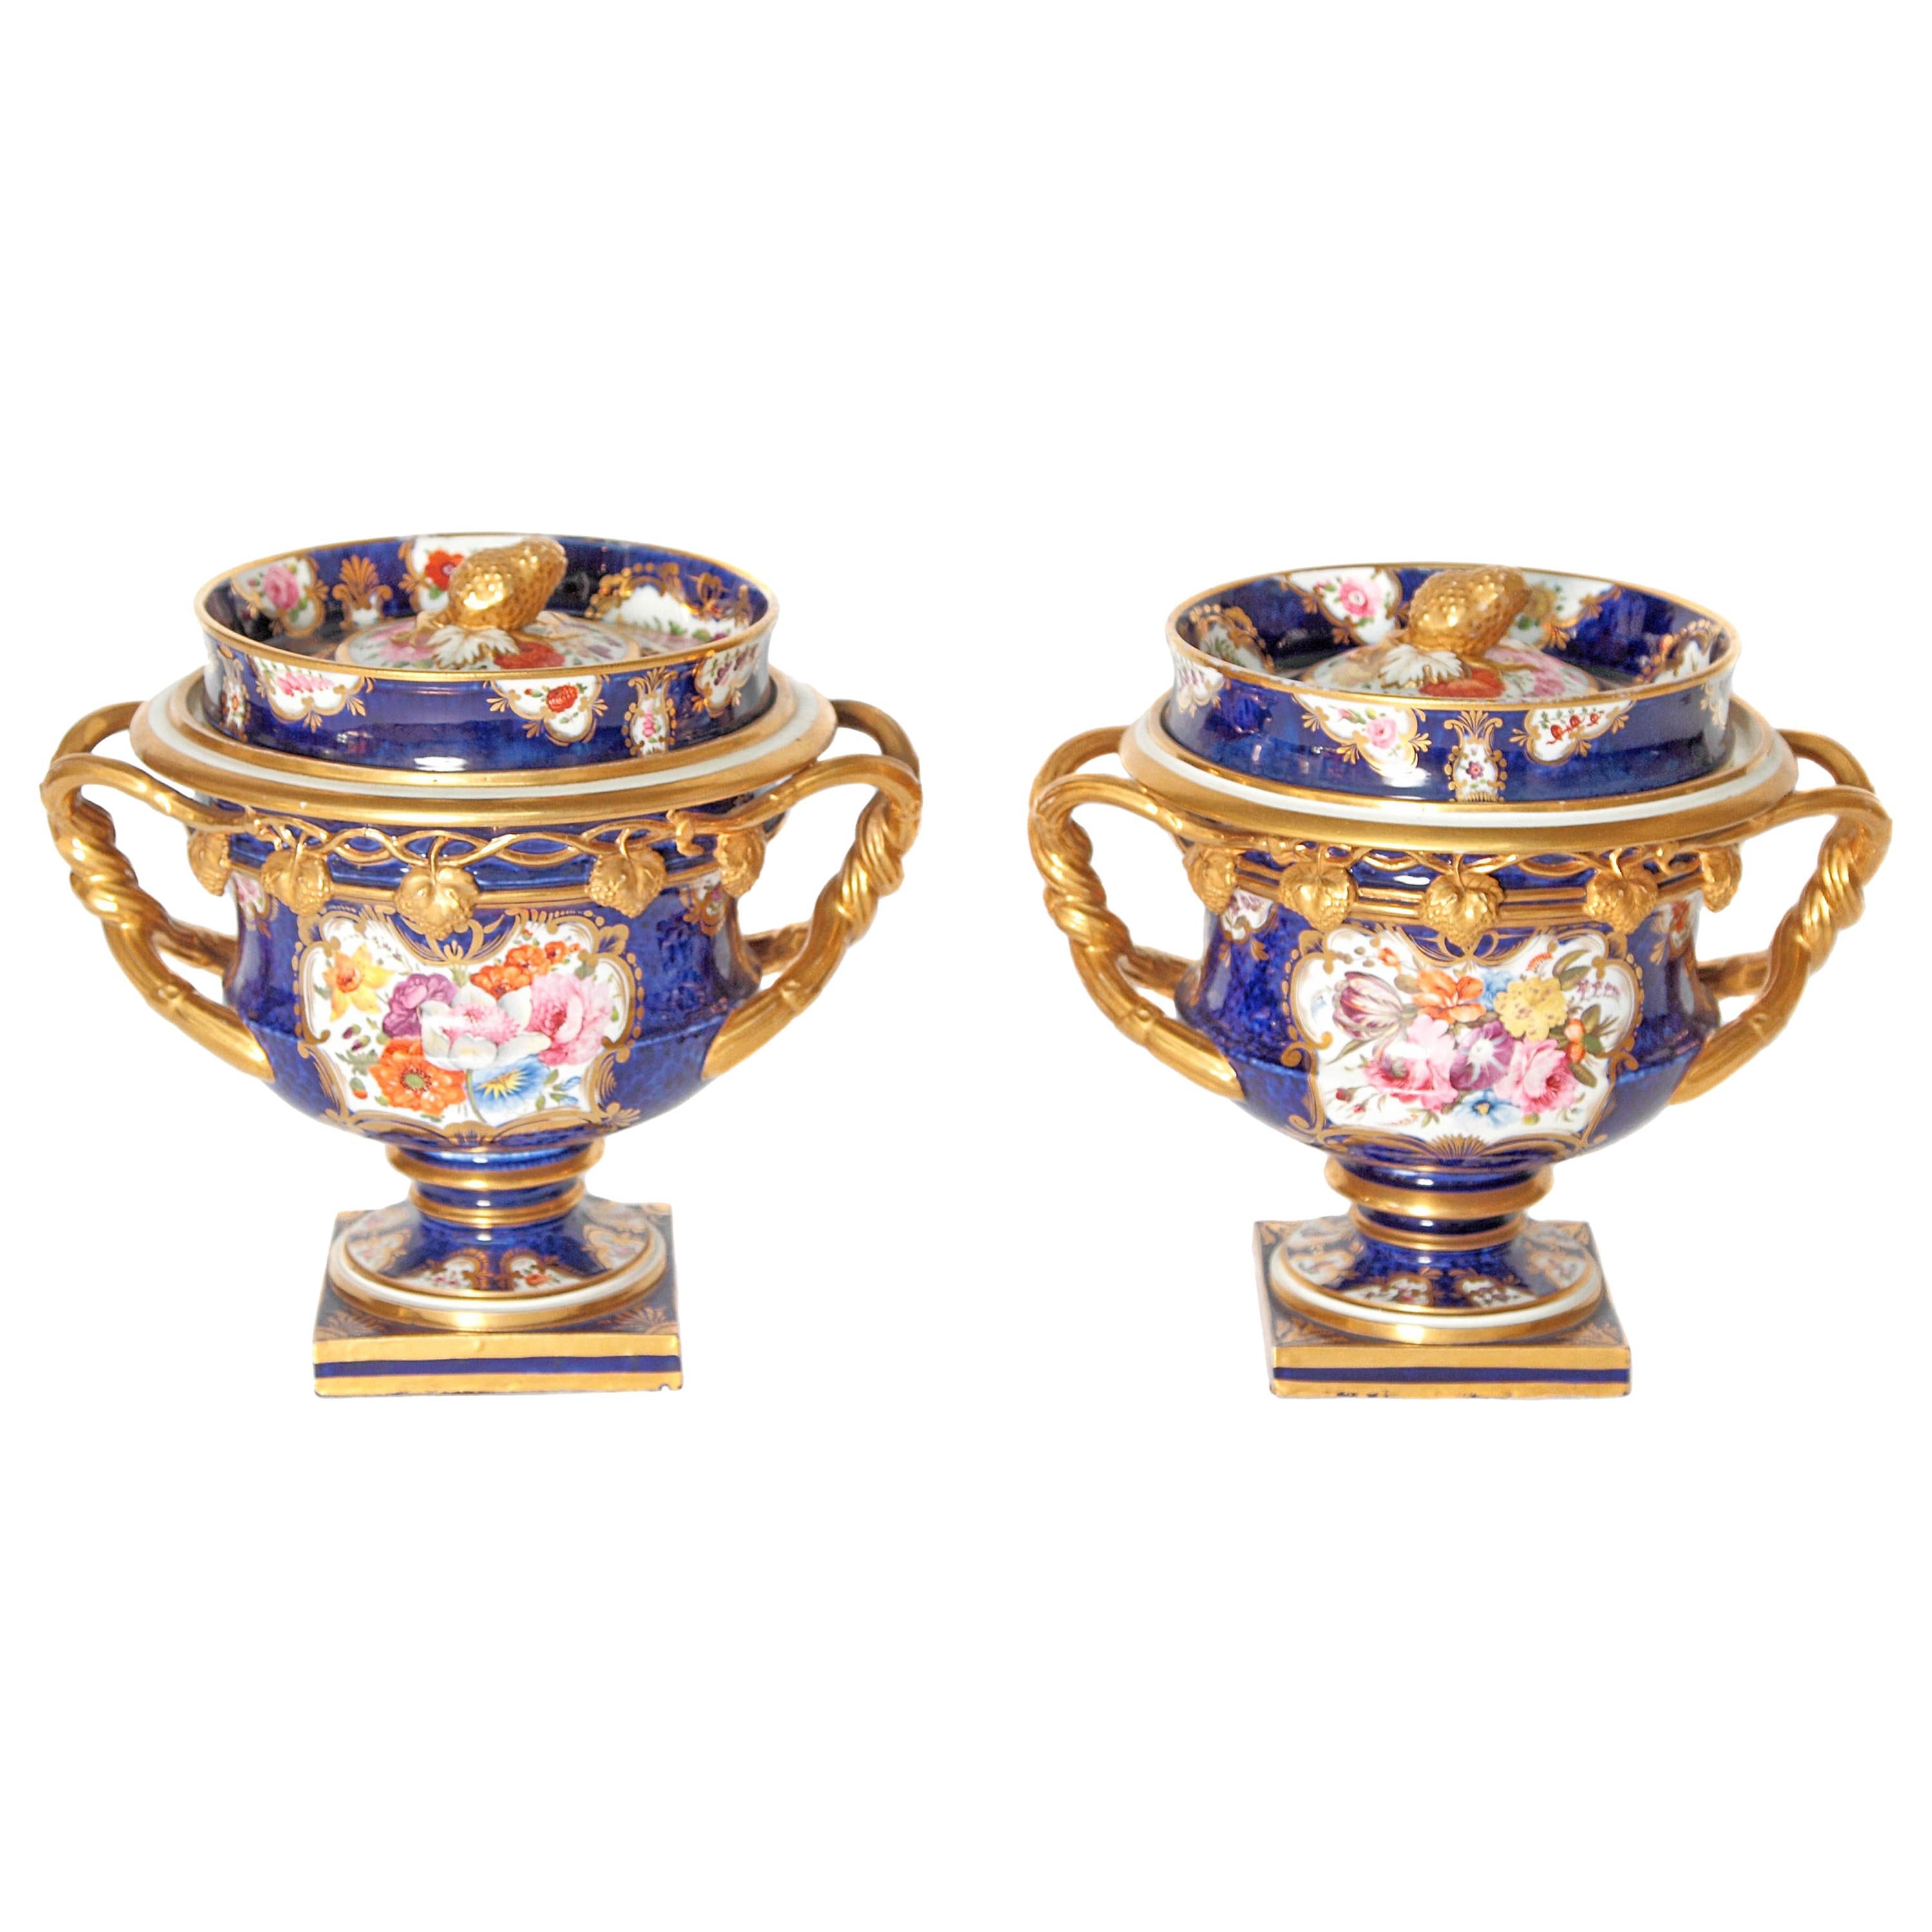 Pair of 19th Century English Porcelain Fruit Coolers with Covers